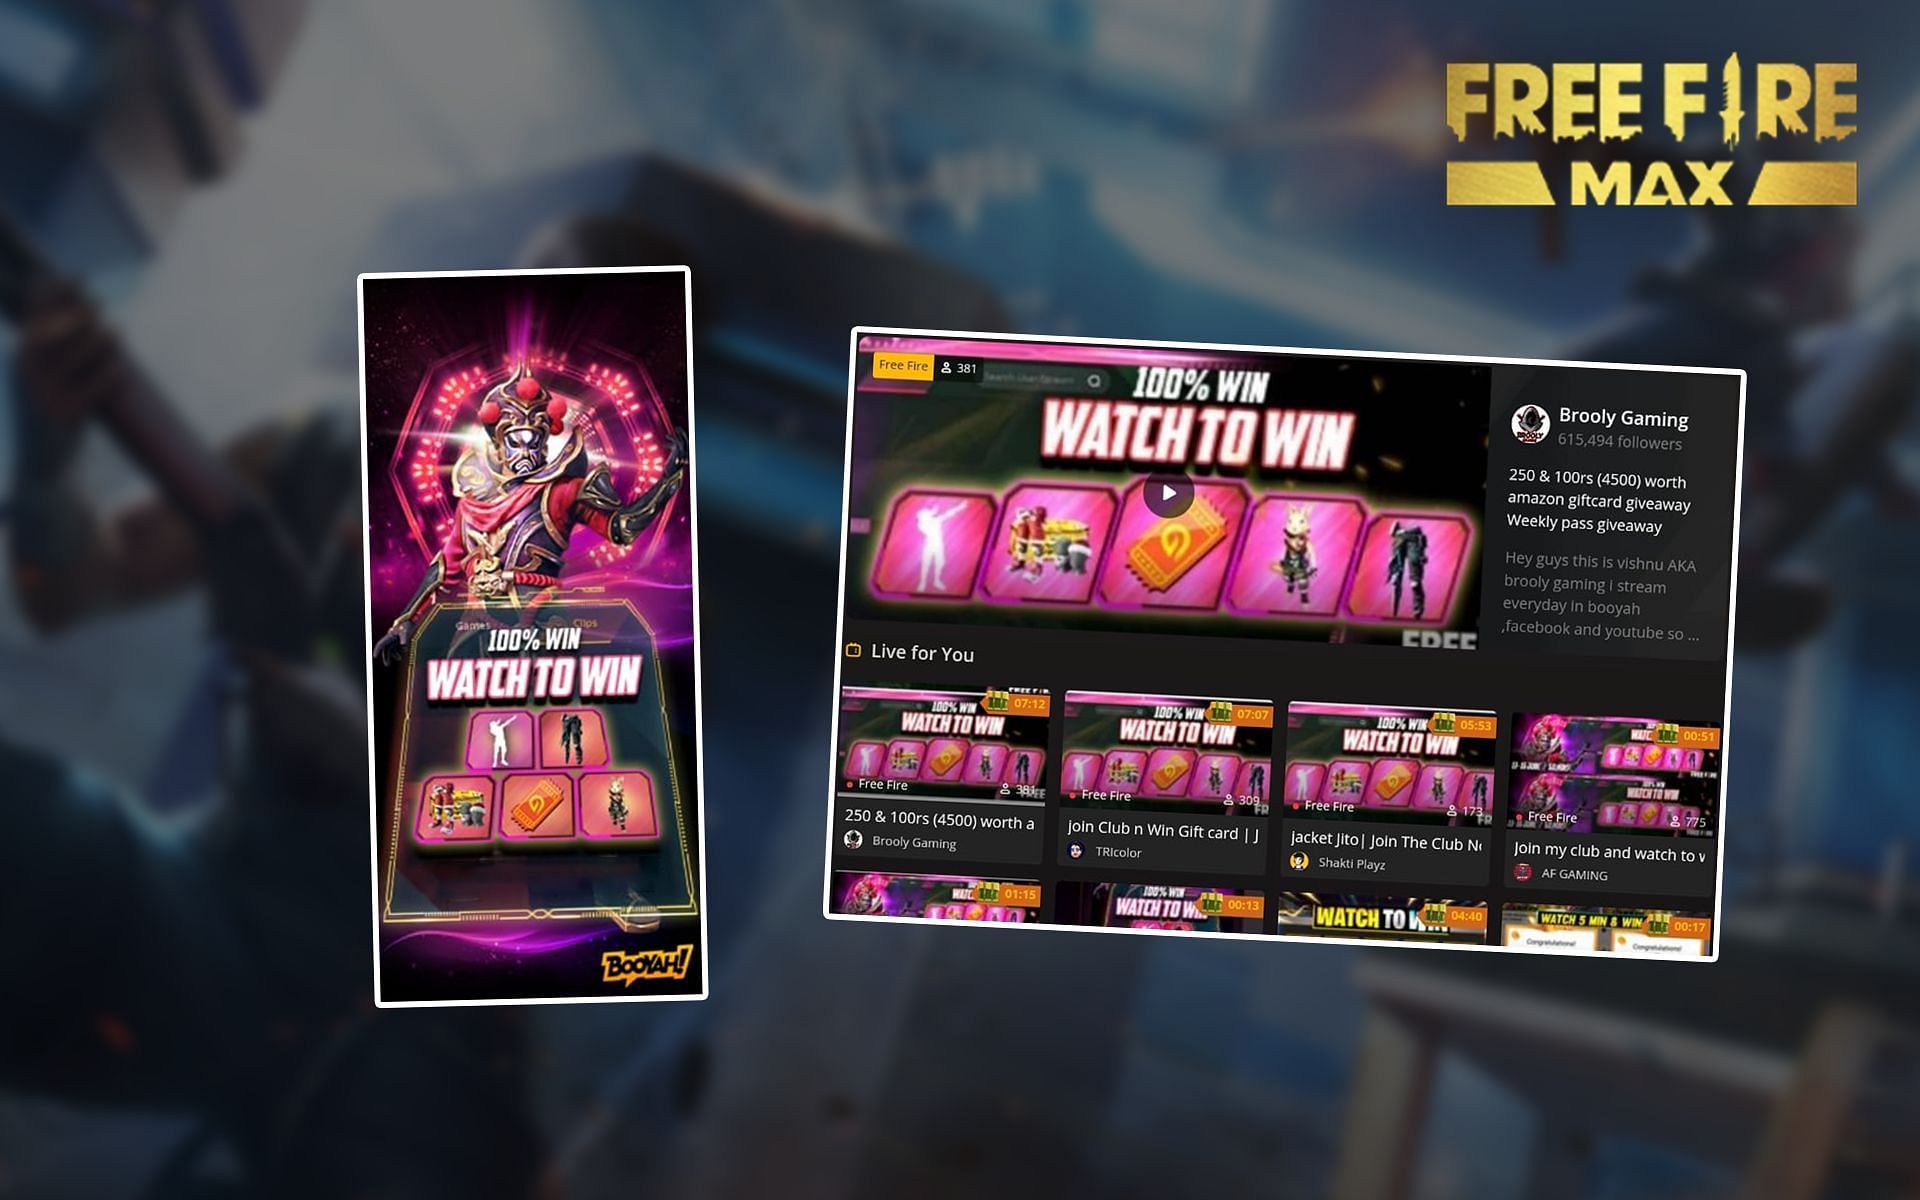 The Watch to Win event is back in the battle royale game (Image via Sportskeeda)